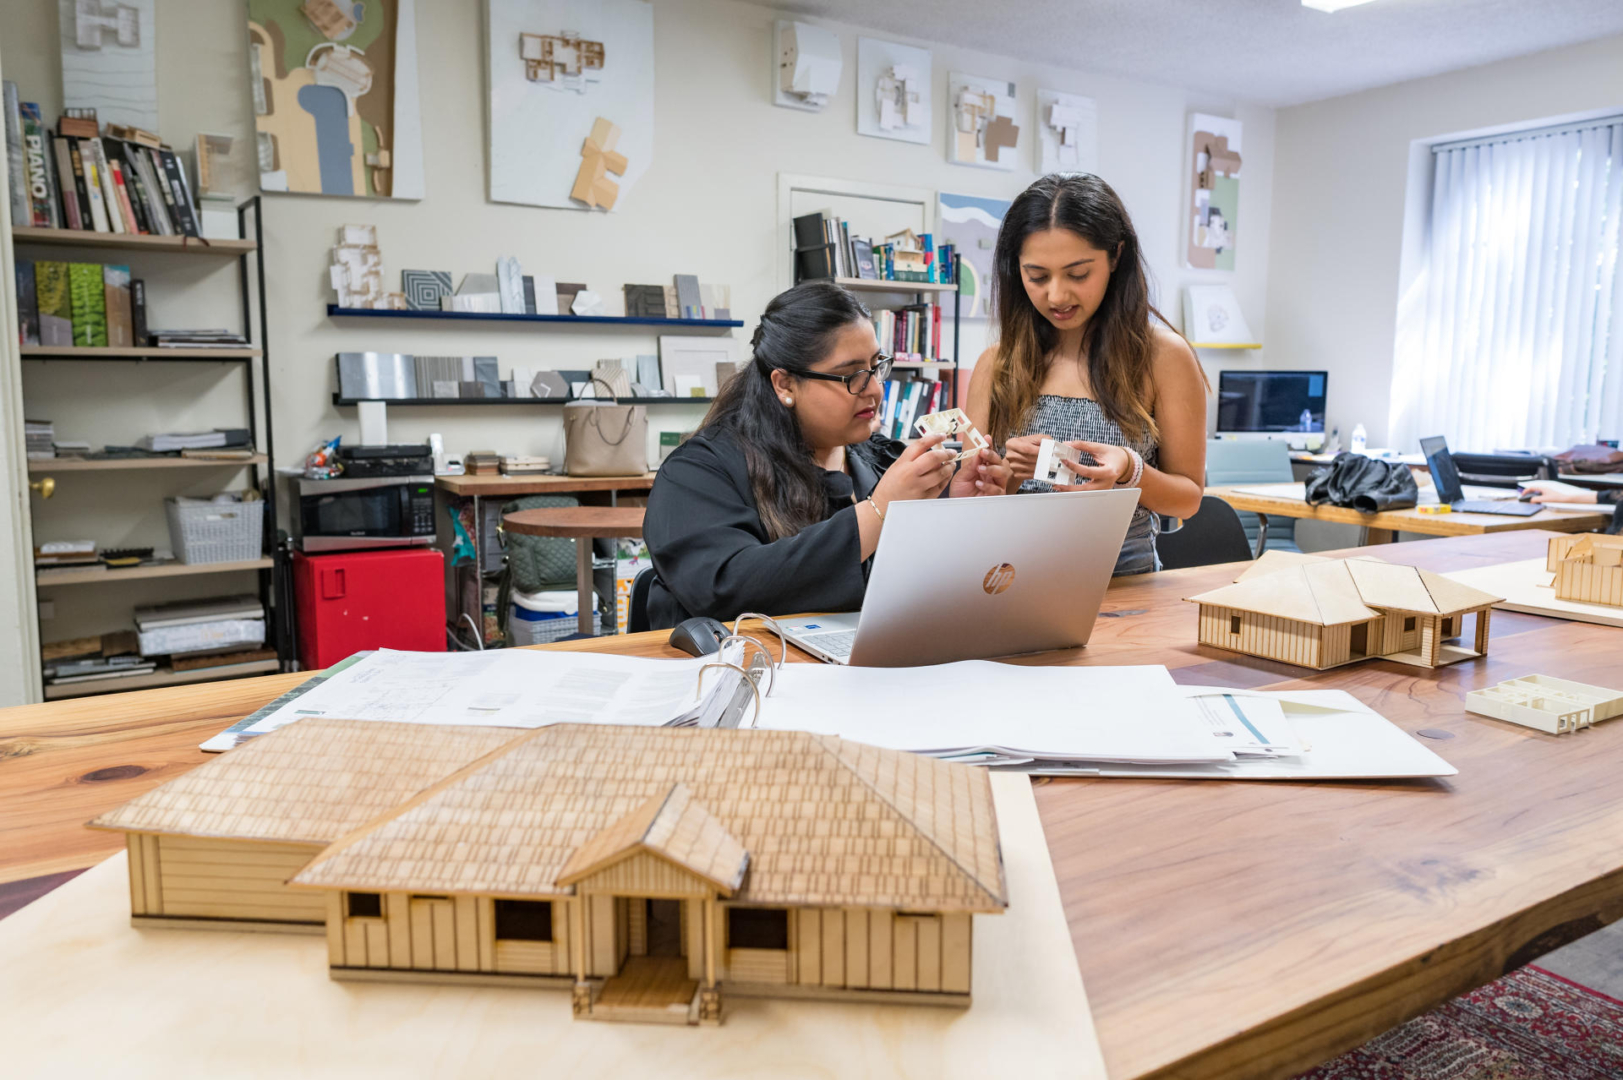 Charvi Grover and Hira Namit hold tiny plastic models of homes in their hands while working on a laptop in the design studio. A wooden model of the house sits on the table in front of them.